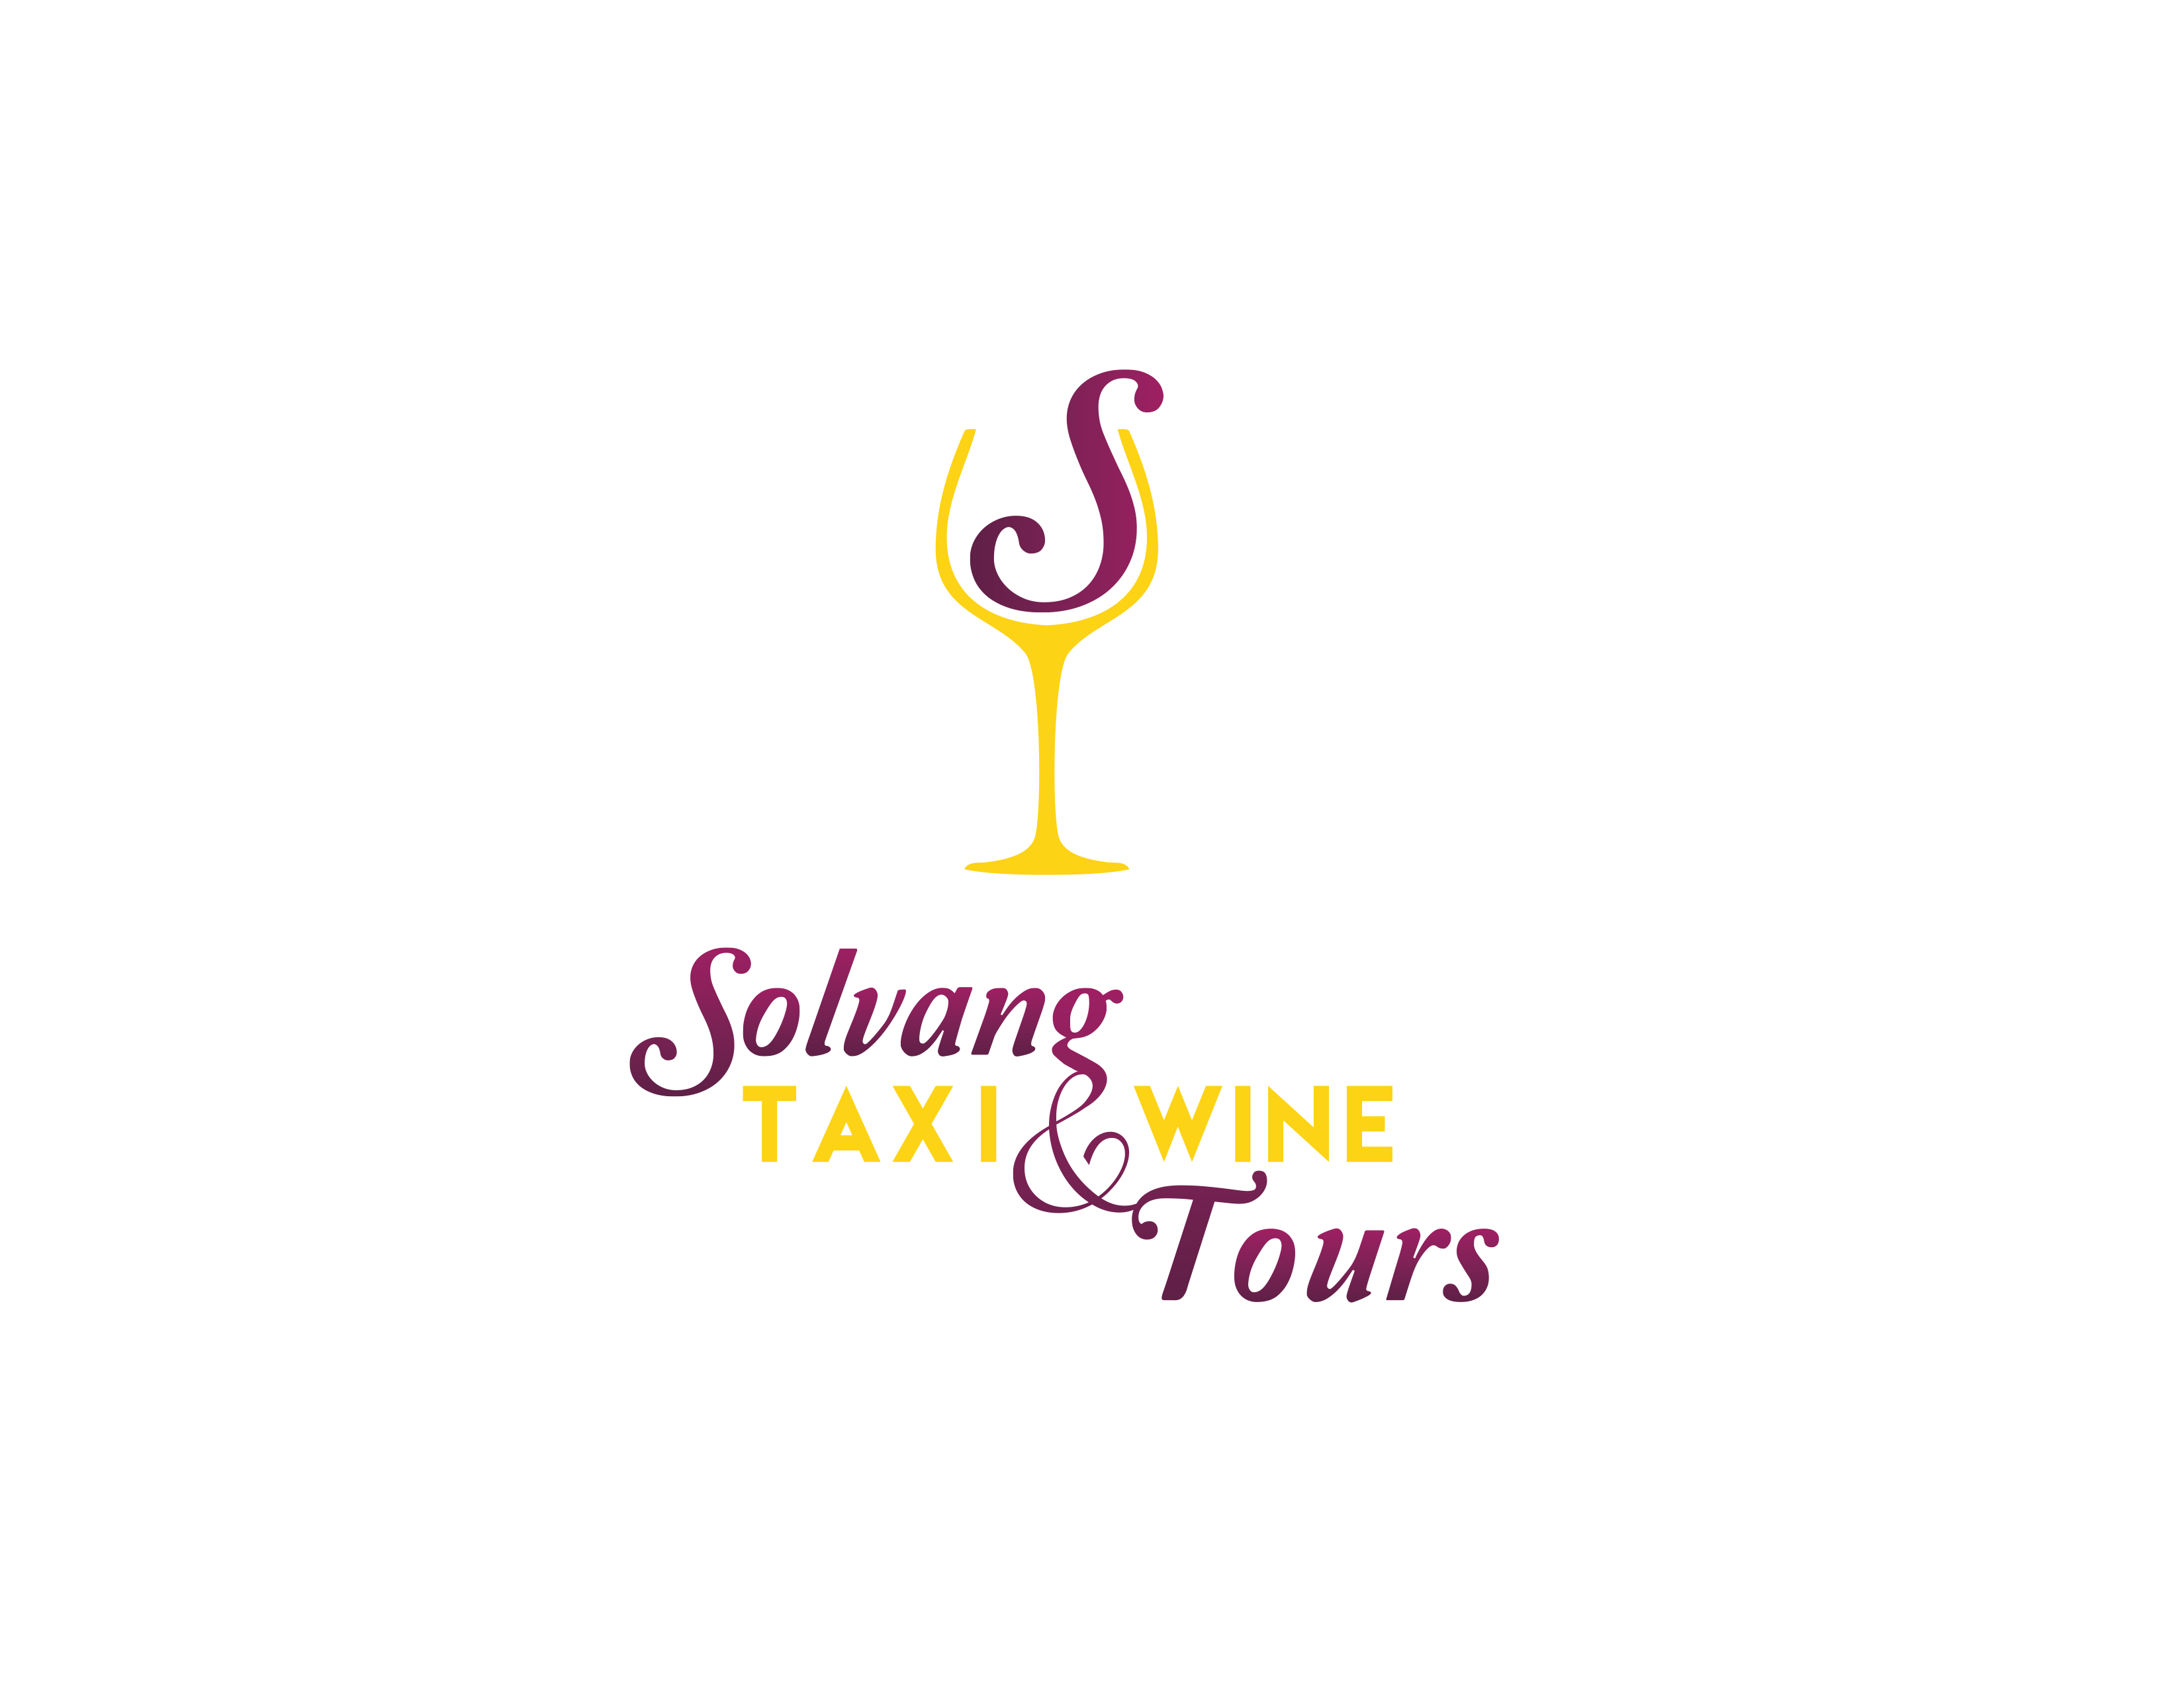 Solvang Taxi & Wine Tours